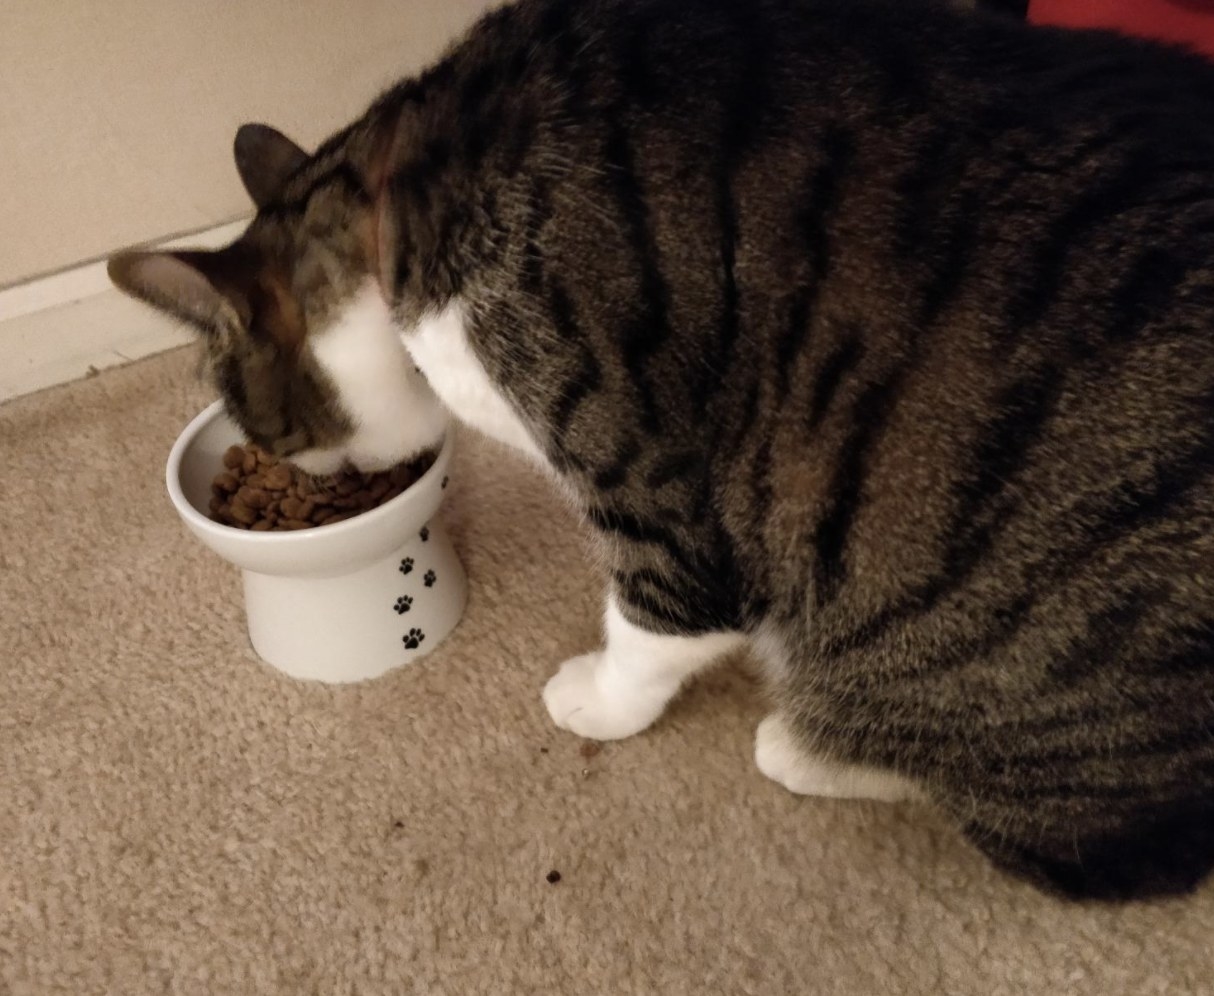 A cat eating from a raised cat food bowl